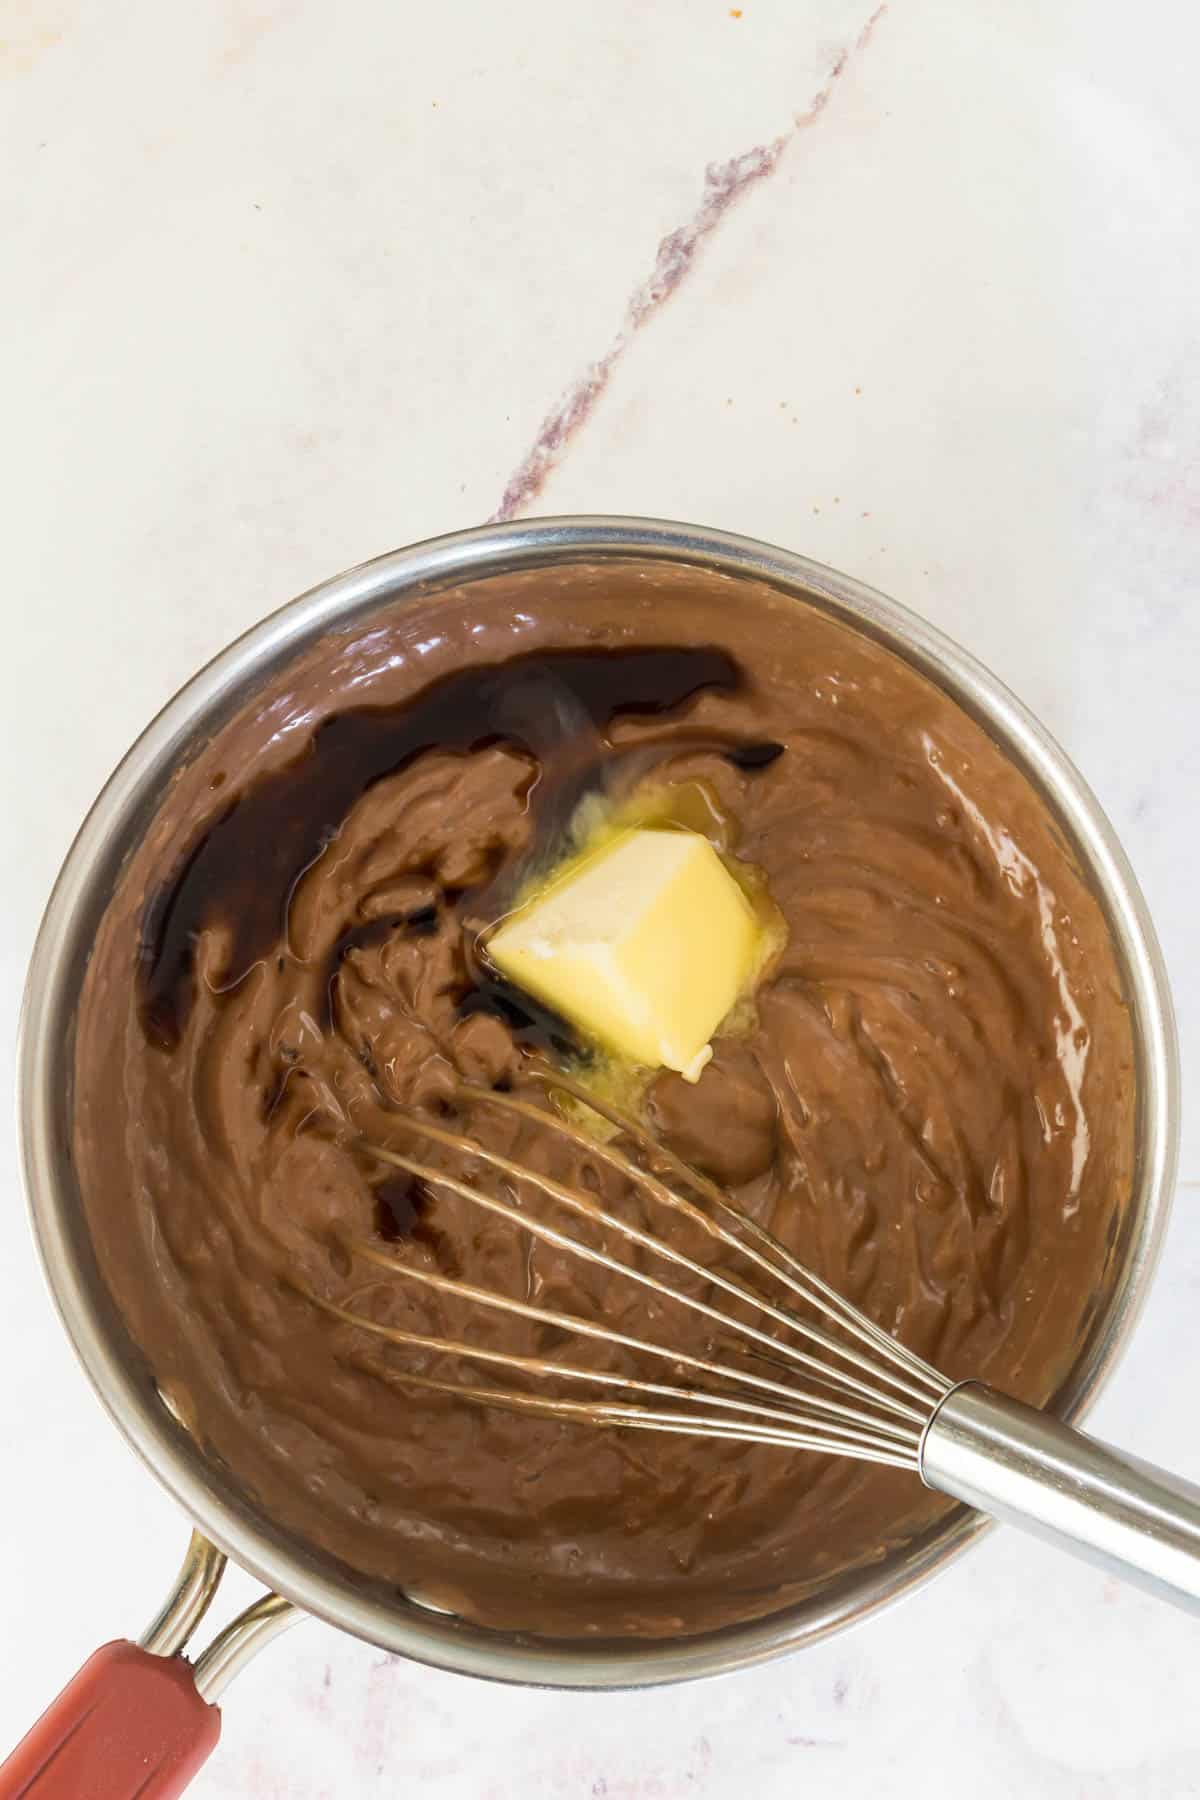 Butter and vanilla is added into a saucepan with the chocolate pudding base.